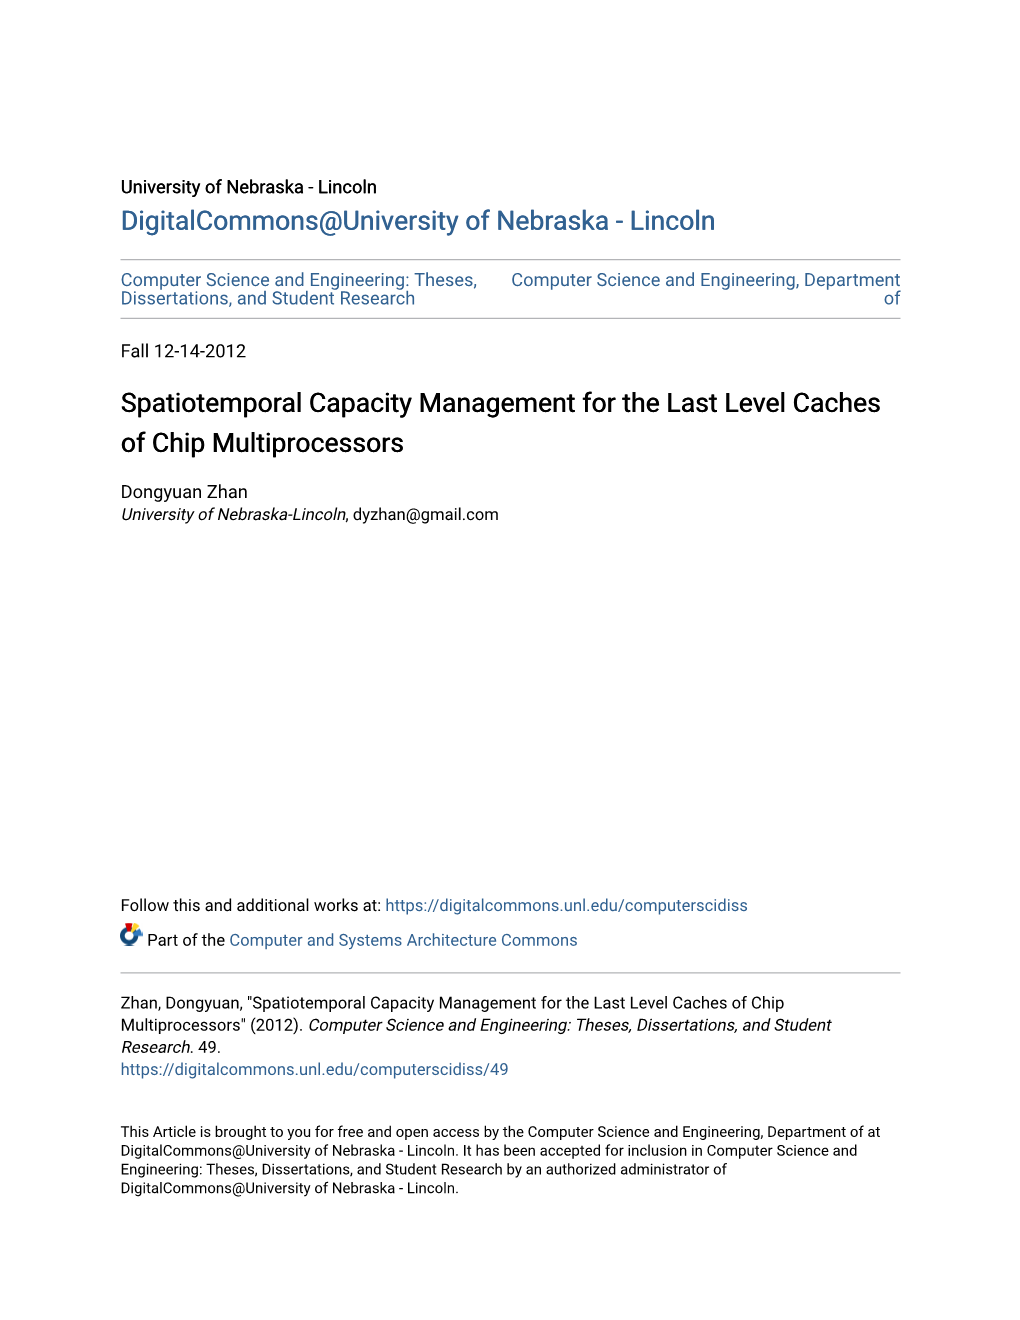 Spatiotemporal Capacity Management for the Last Level Caches of Chip Multiprocessors